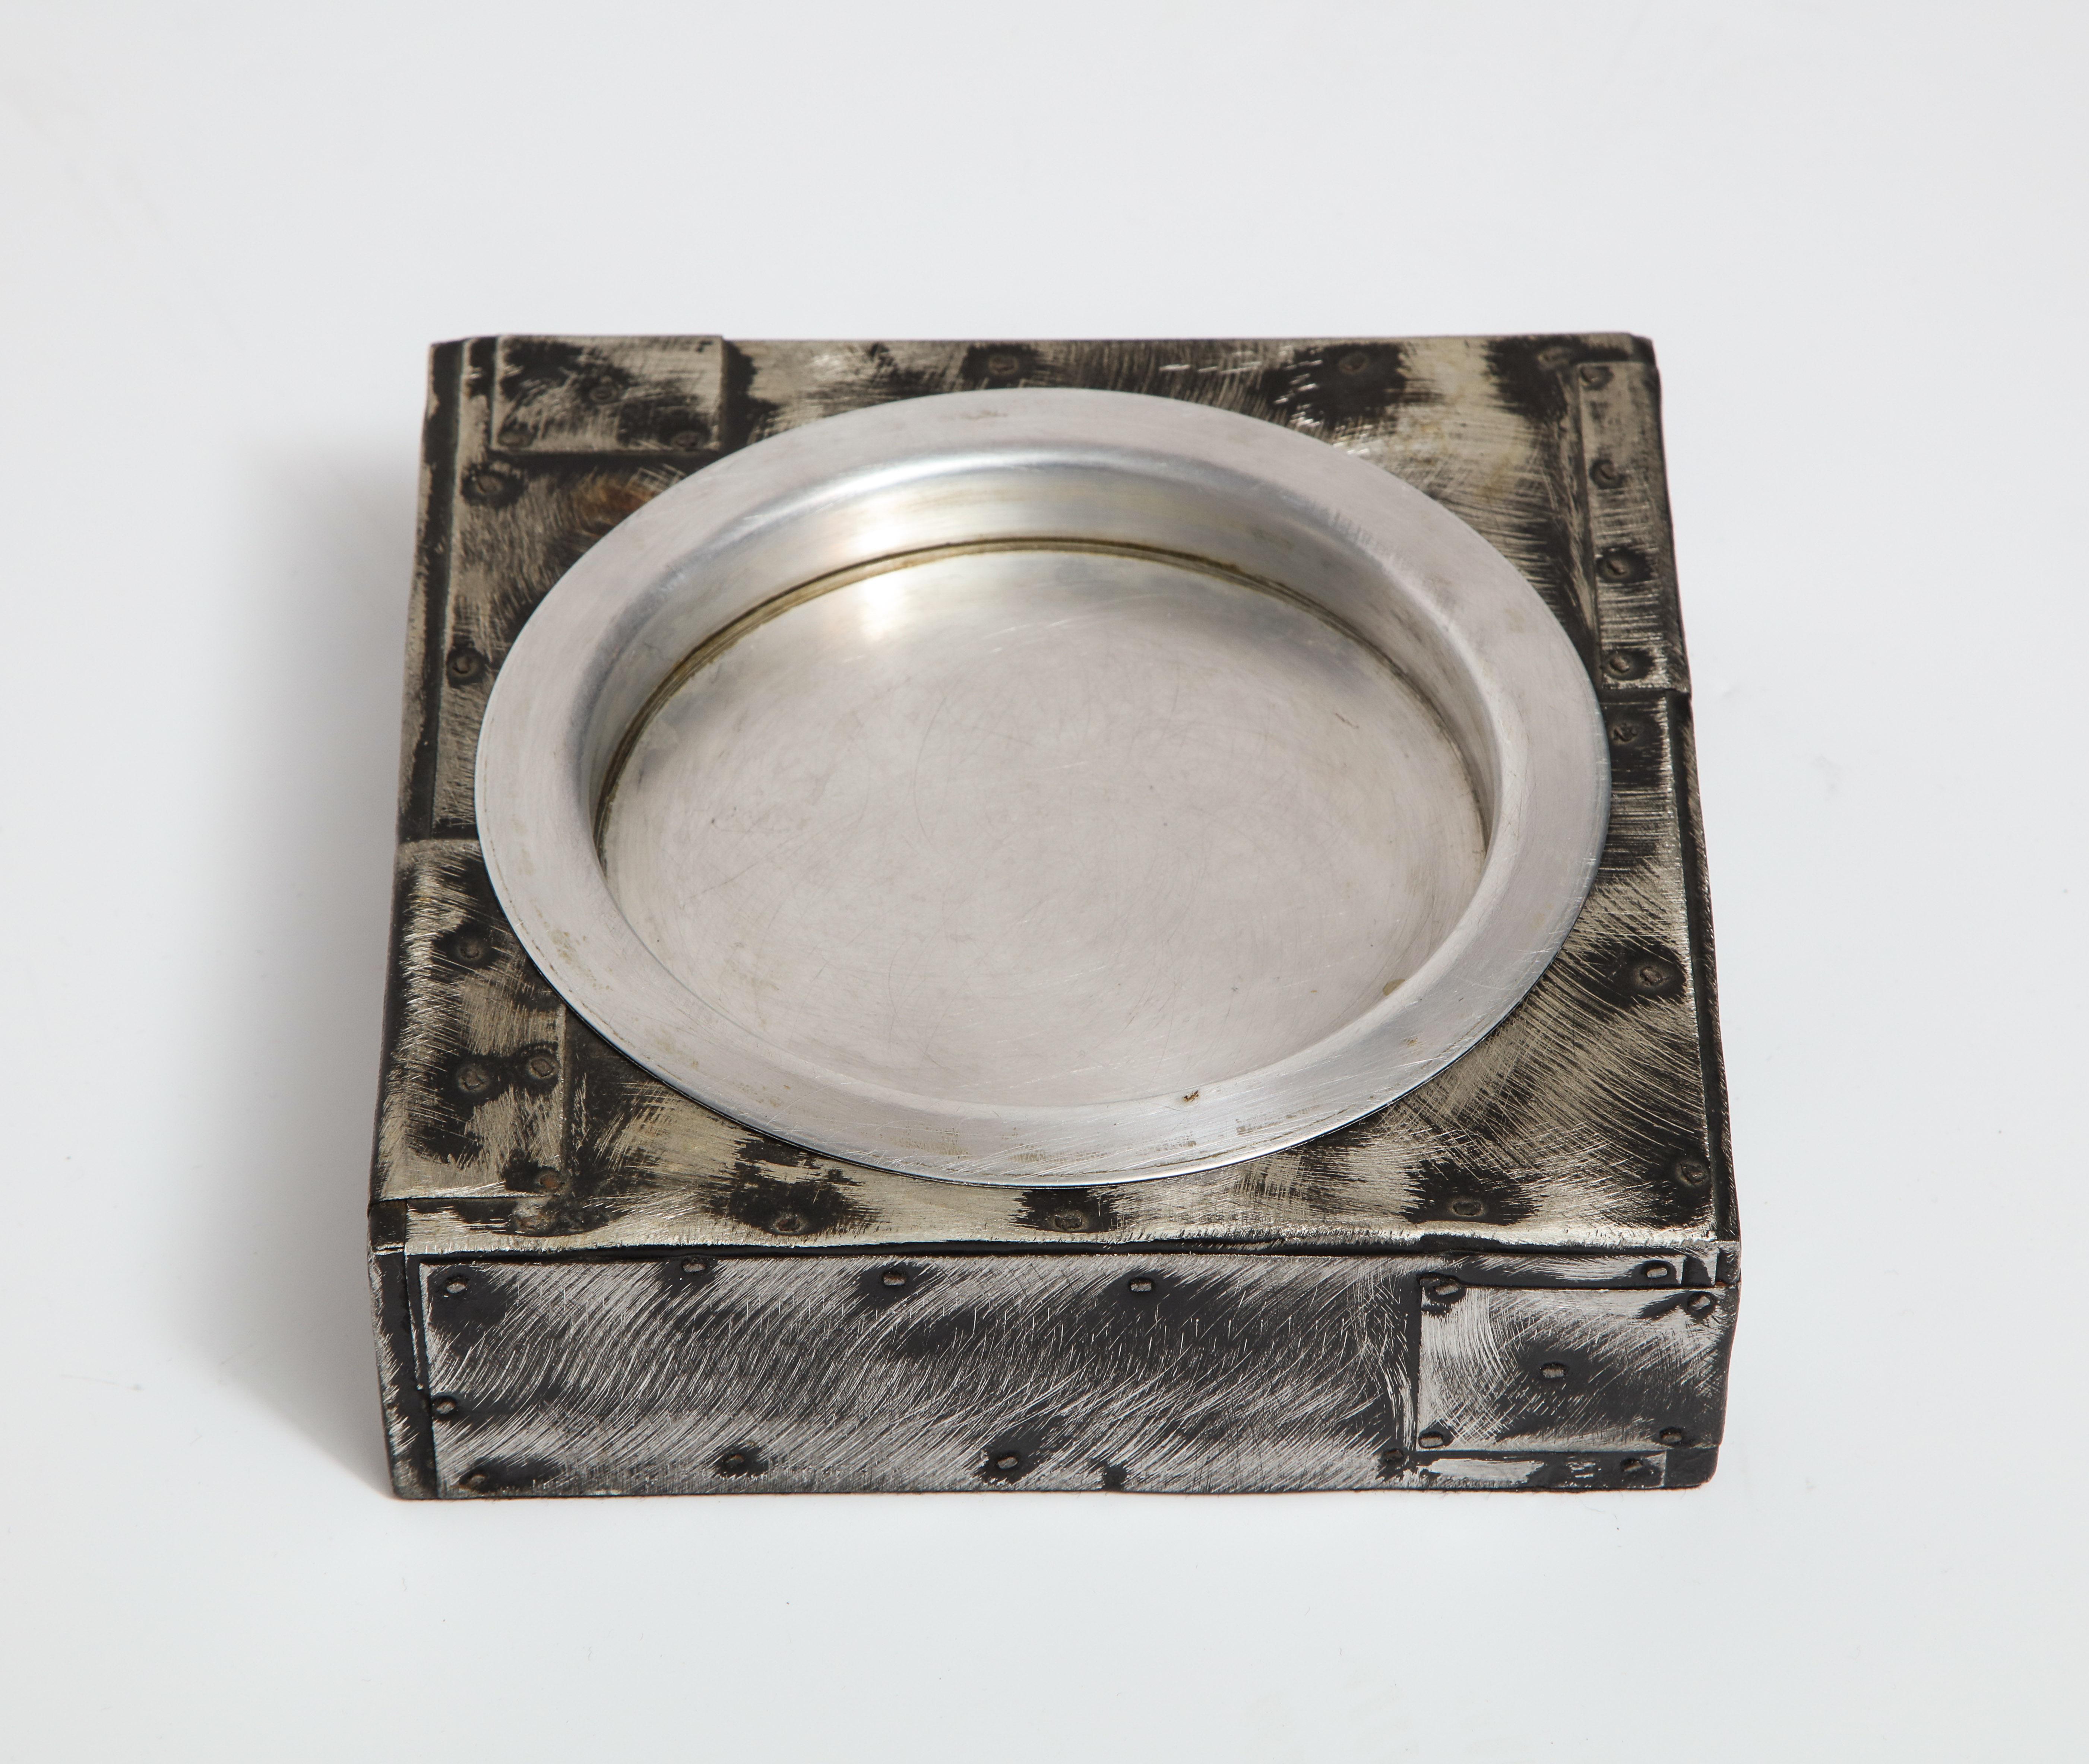 Paul Evans ashtray argente Pewter Patchwork. Square patchwork ashtray in rare argente finish with removable aluminium tray. The underside retains its original black felt. I would like to thank Dorsey Reading, Evans' shop manager, for verifying it's